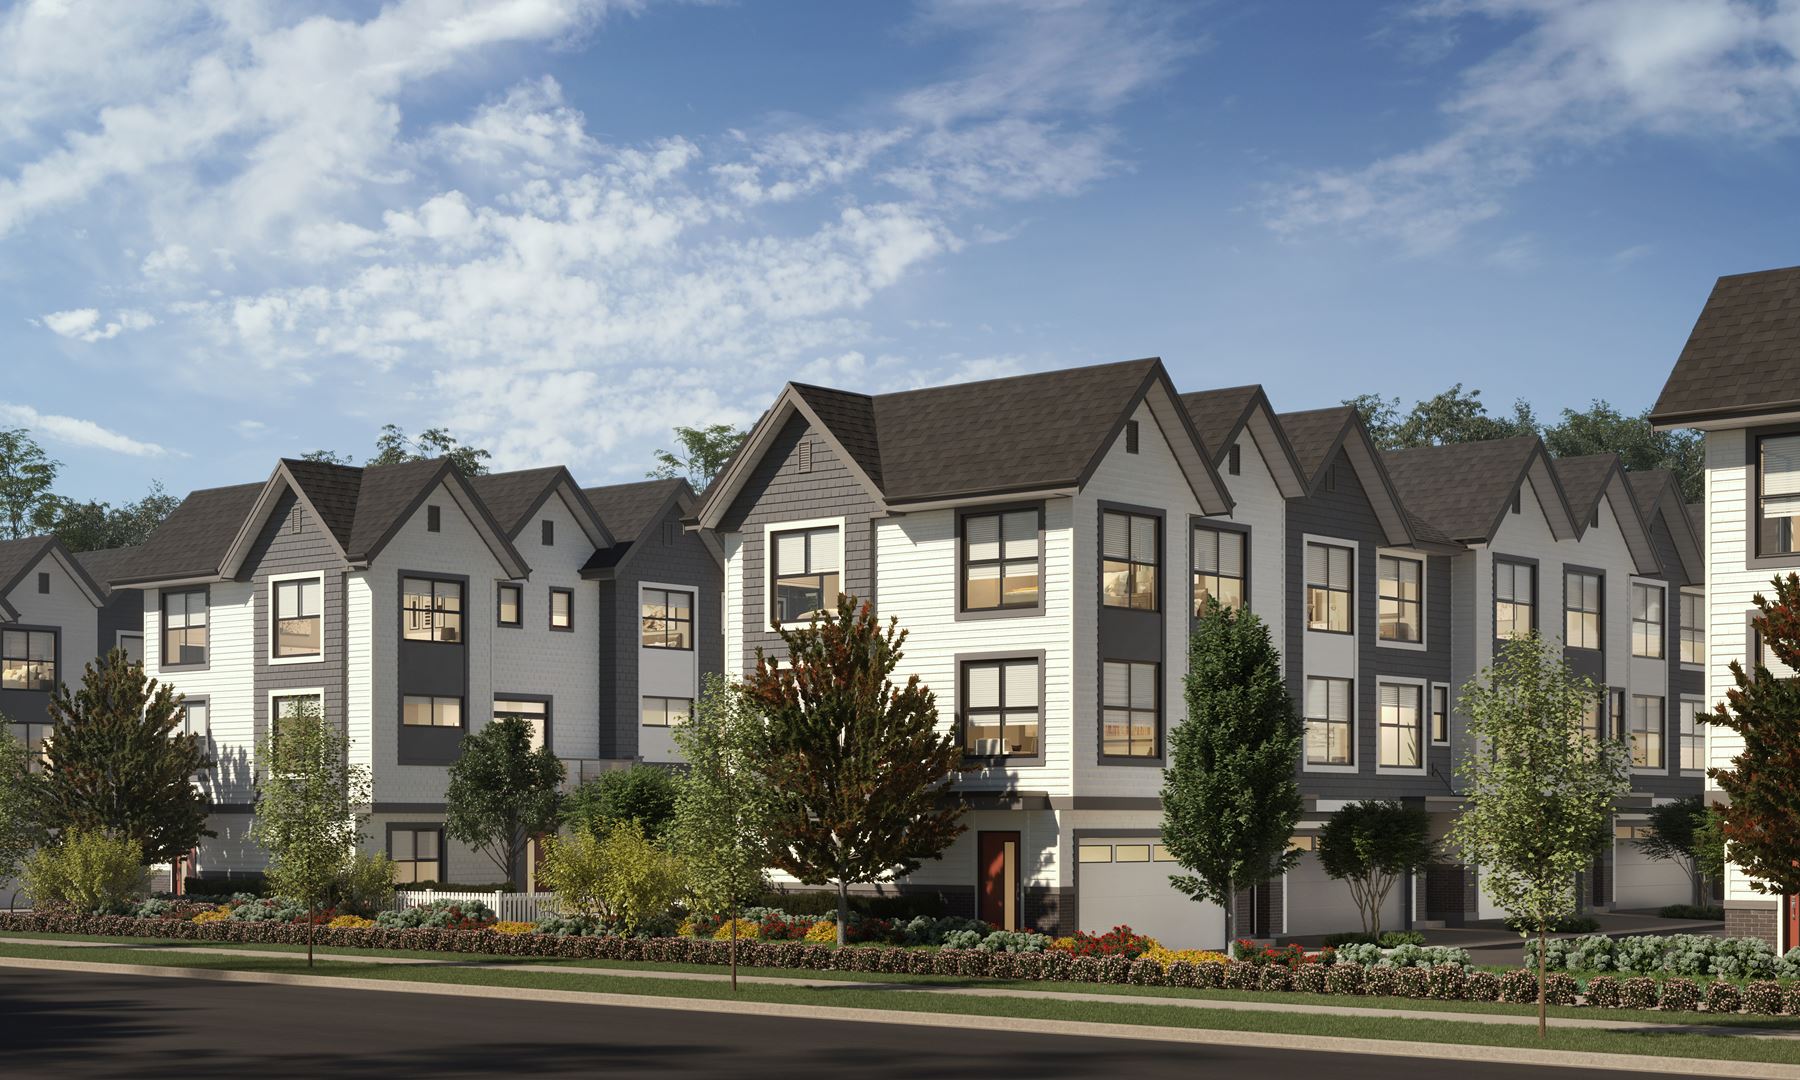 A collection of 29 bright, contemporary townhomes in Maple Ridge.